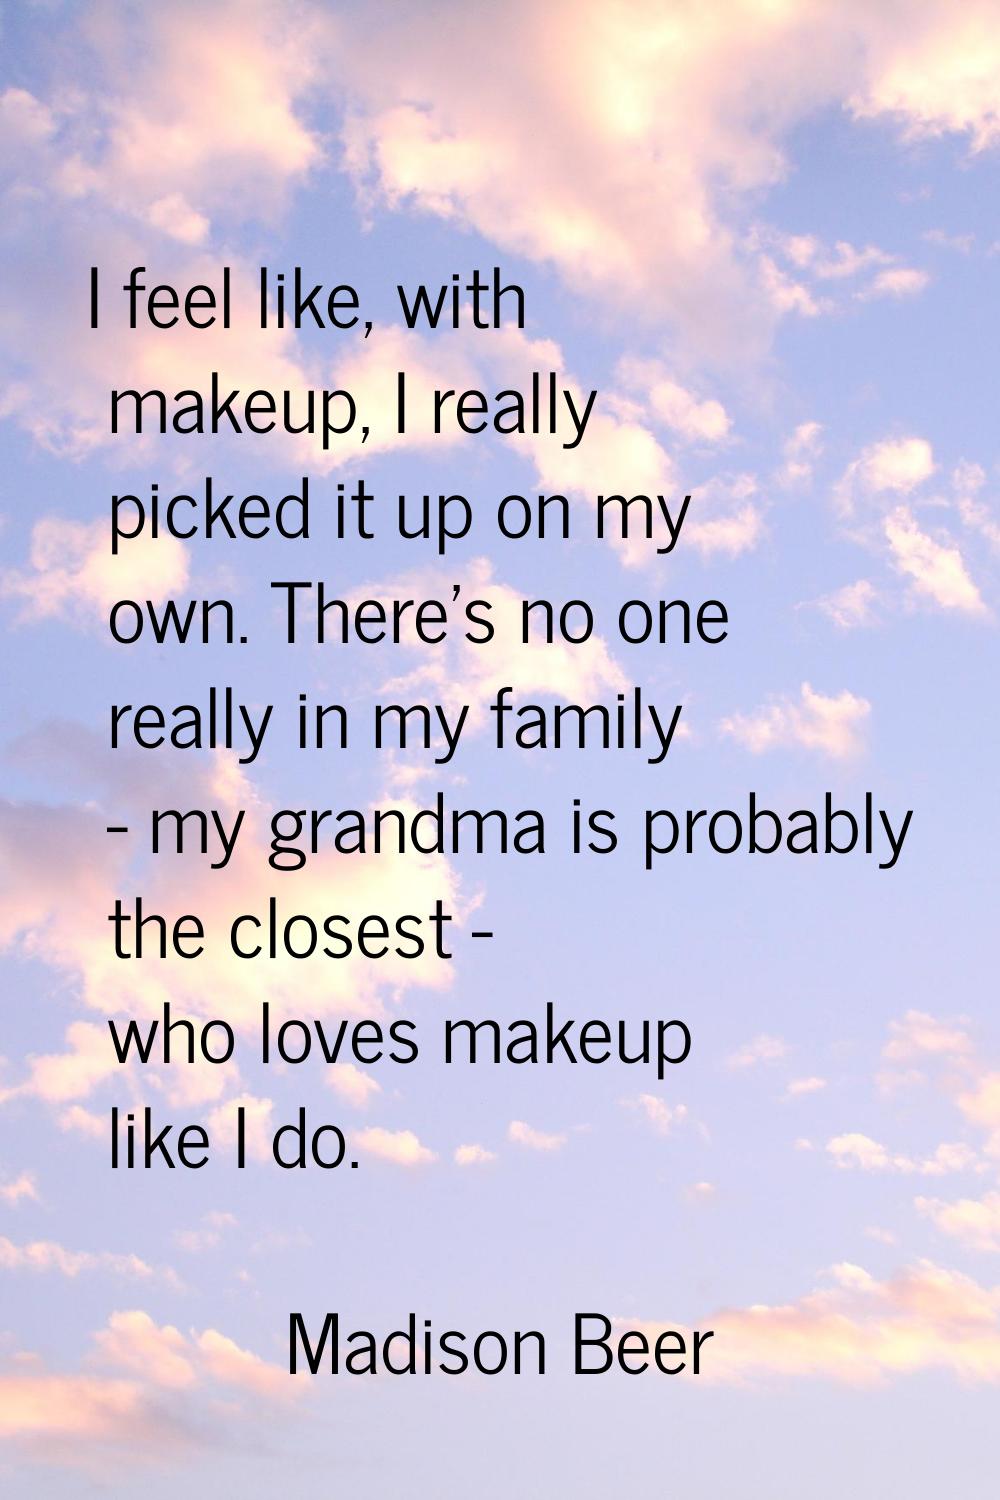 I feel like, with makeup, I really picked it up on my own. There's no one really in my family - my 